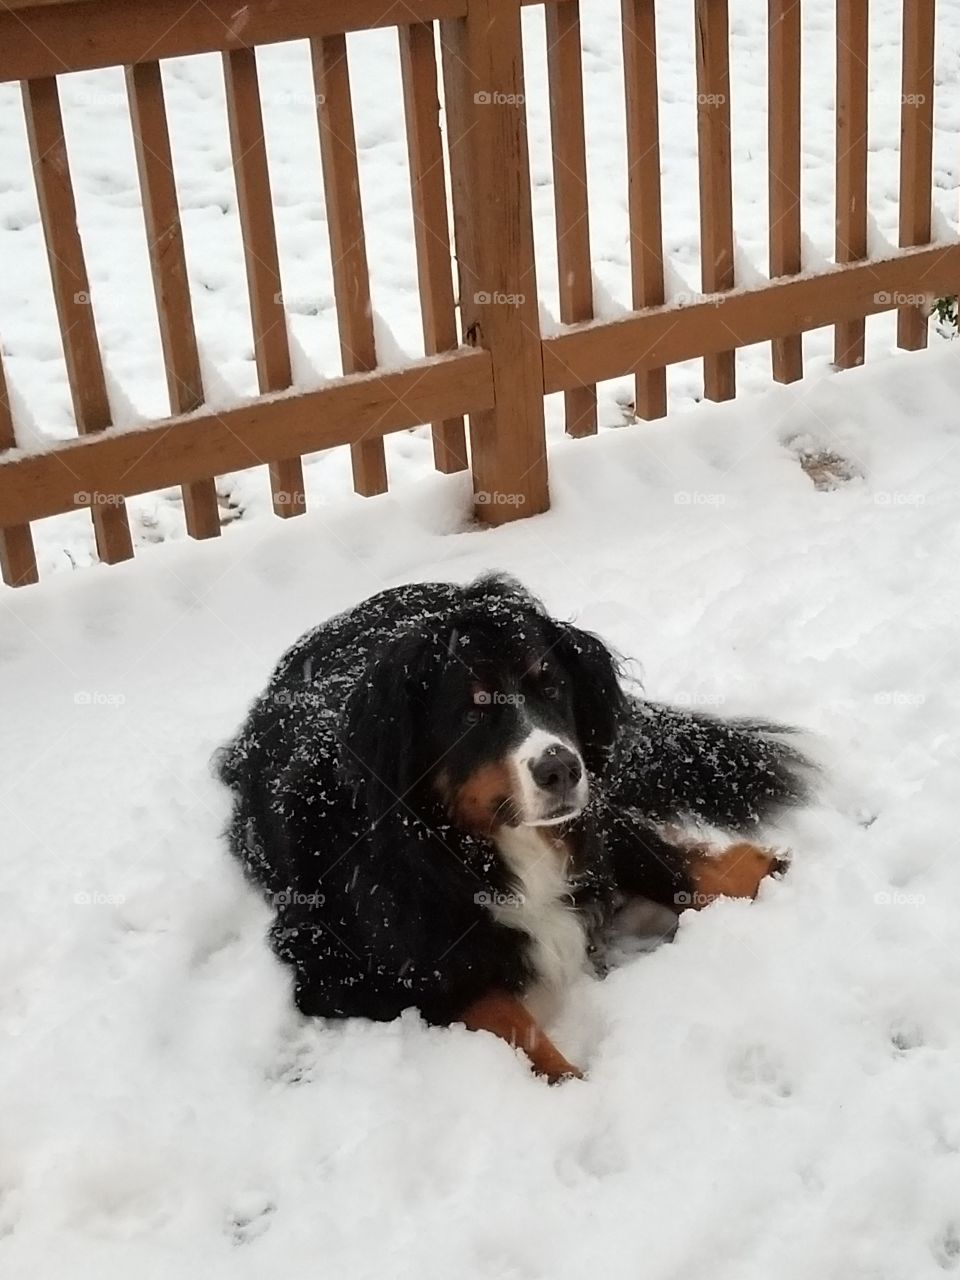 Burnese Mountain Dog in the snow.